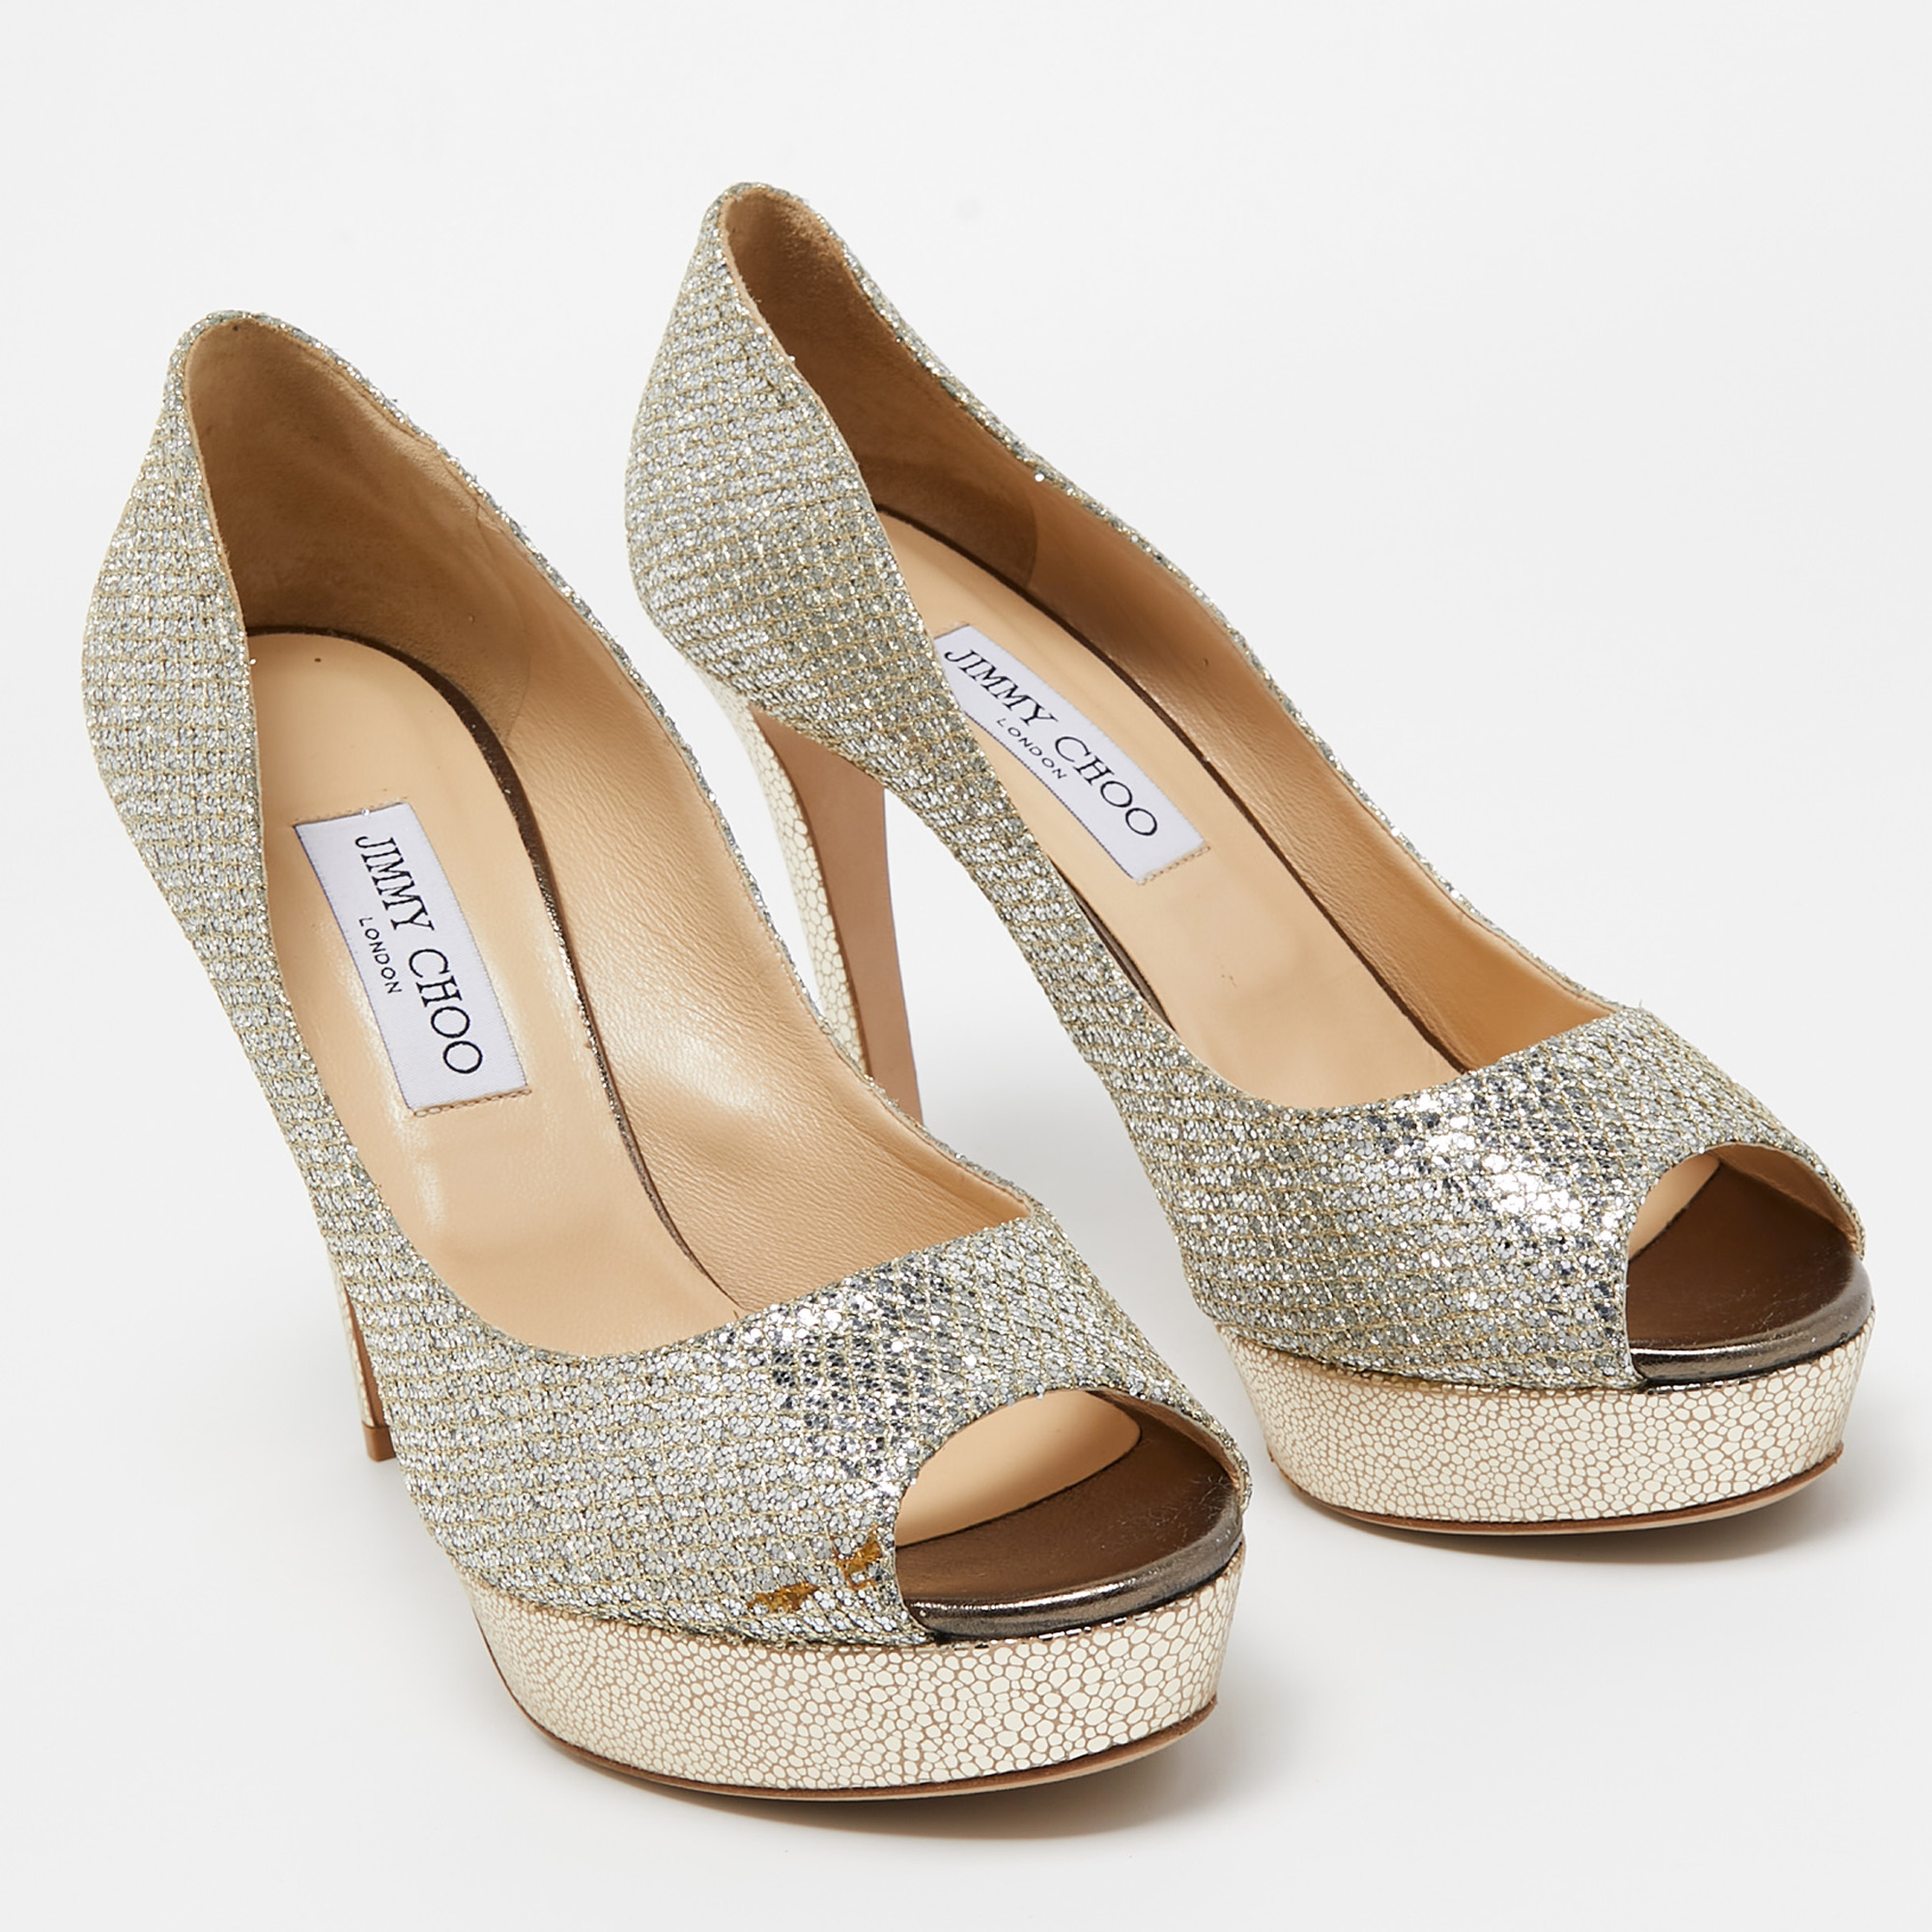 Jimmy Choo Gold/Silver Glitter And Leather Dahlia Peep Toe Pumps Size 41.5